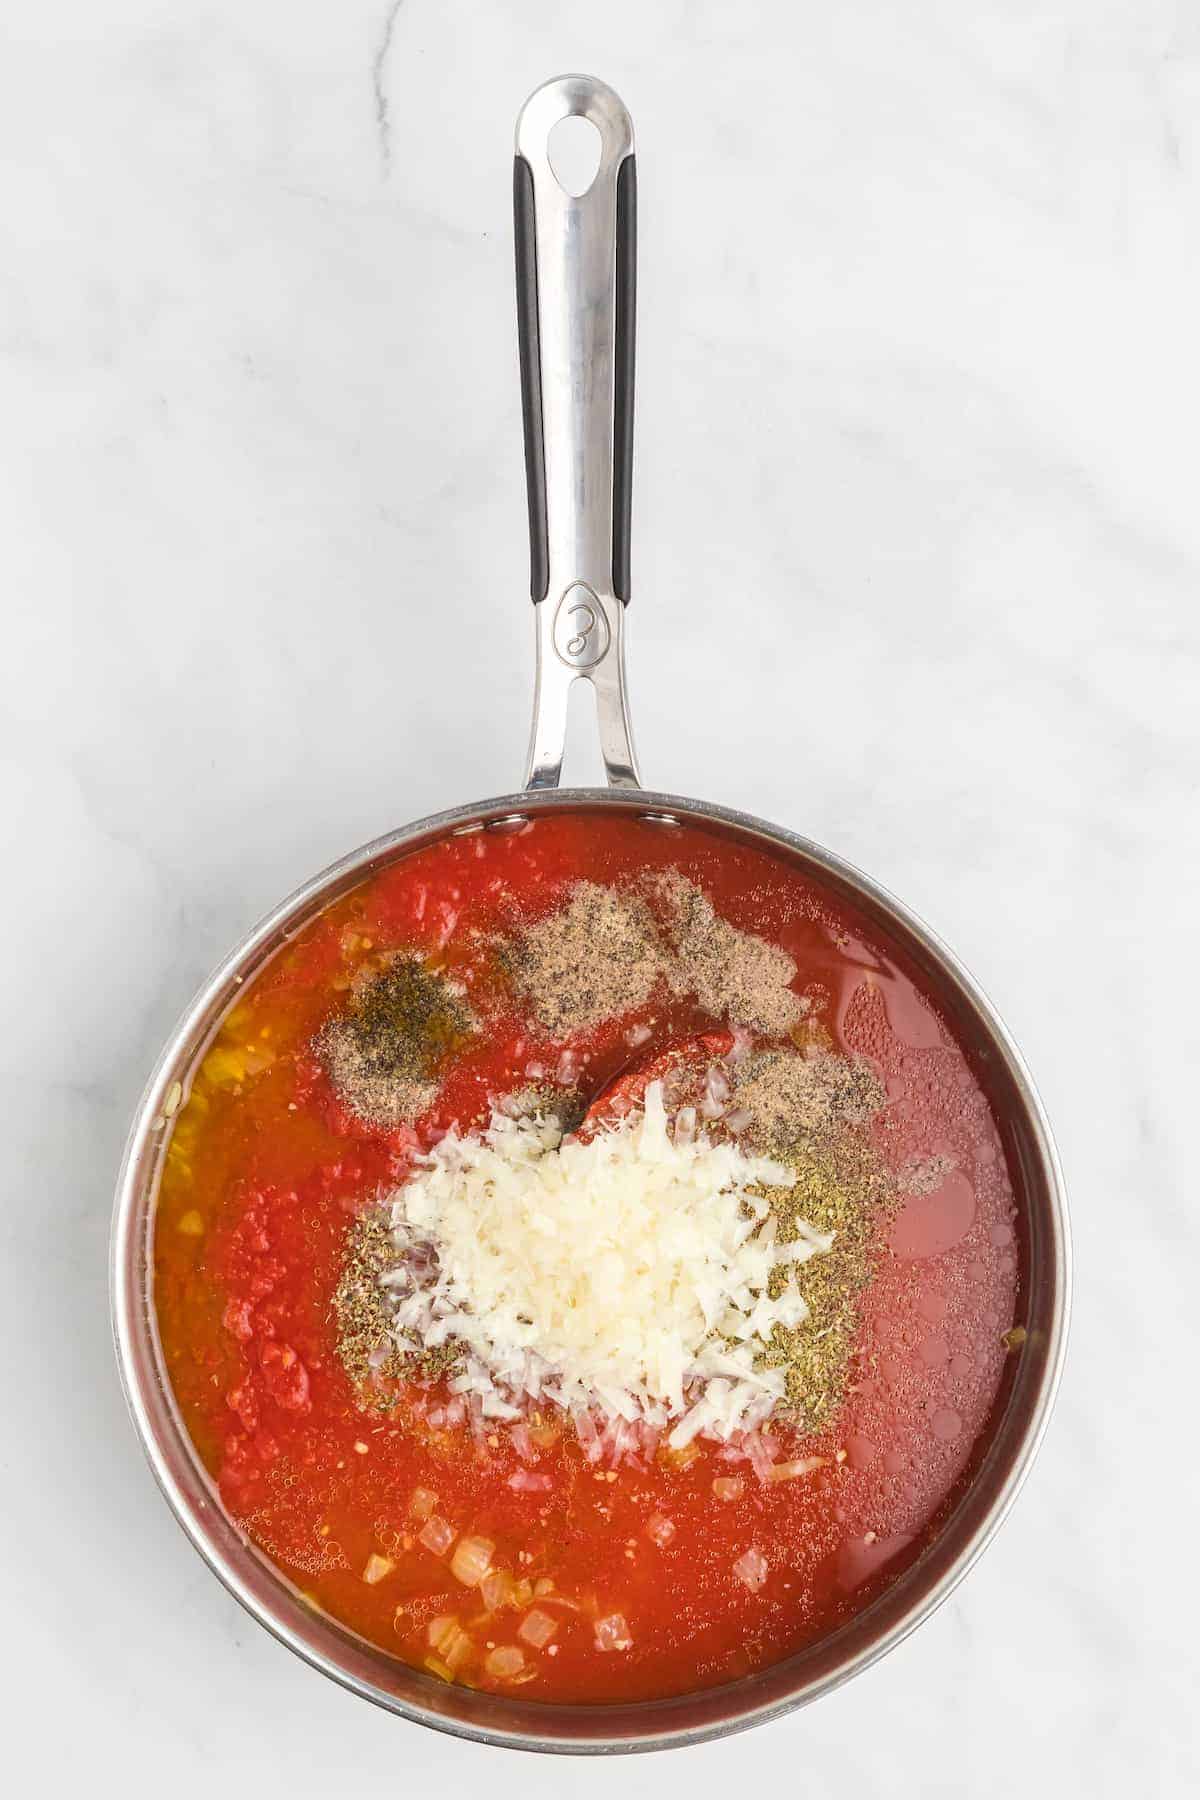 seasonings and parmesan cheese on top of the tomatoes in the saucepan